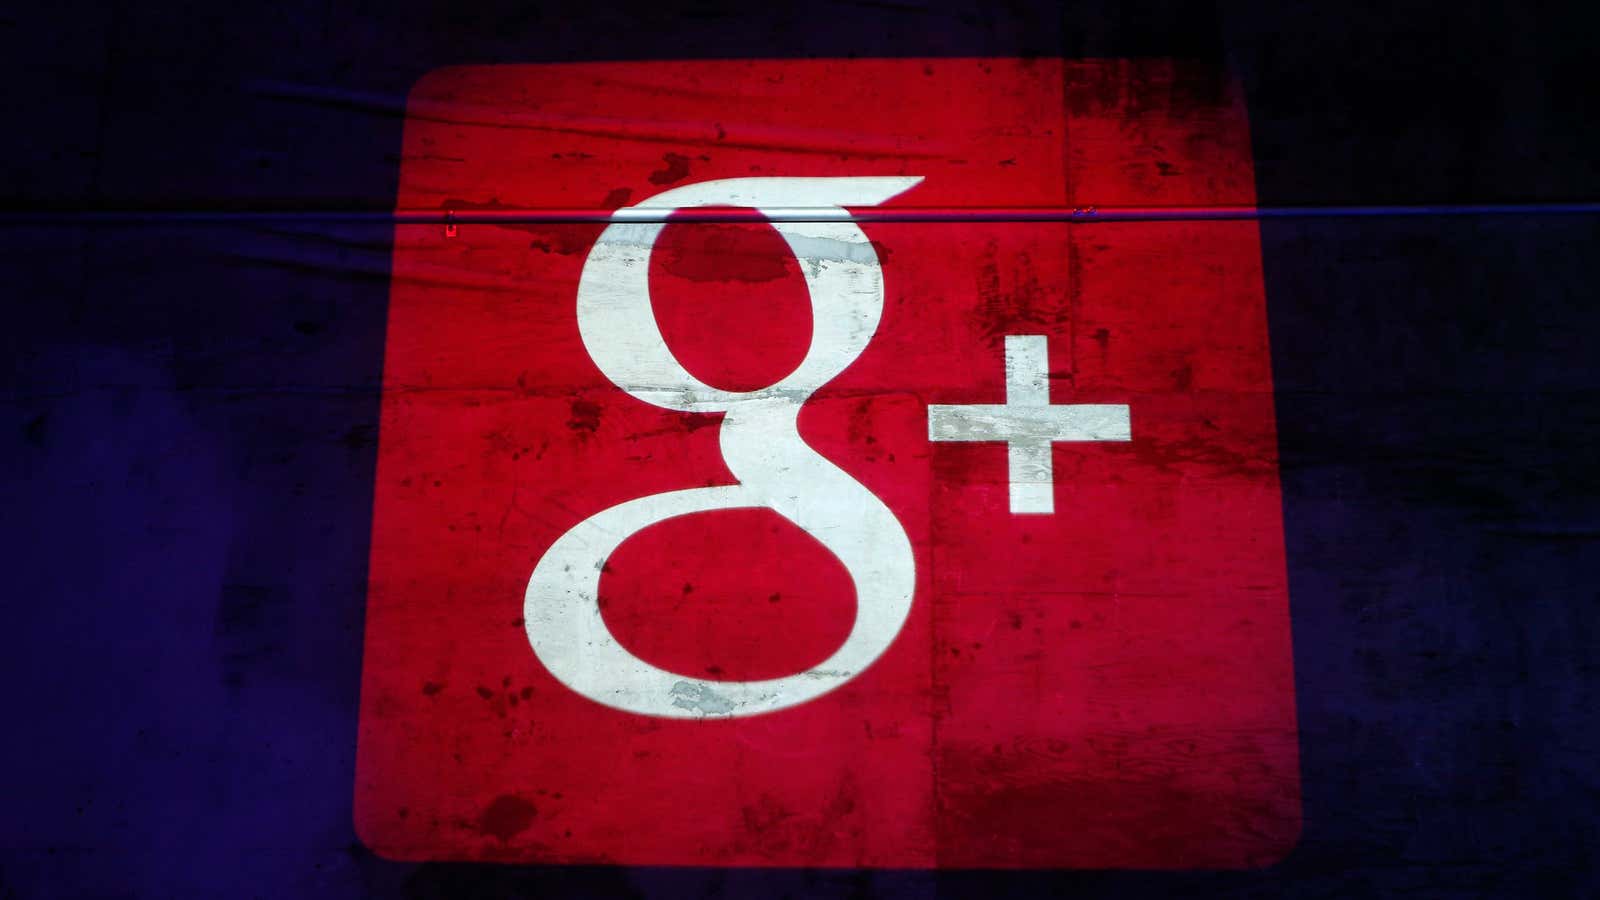 If you want a vision of the future, imagine a Google+ logo following you around wherever you go—forever.